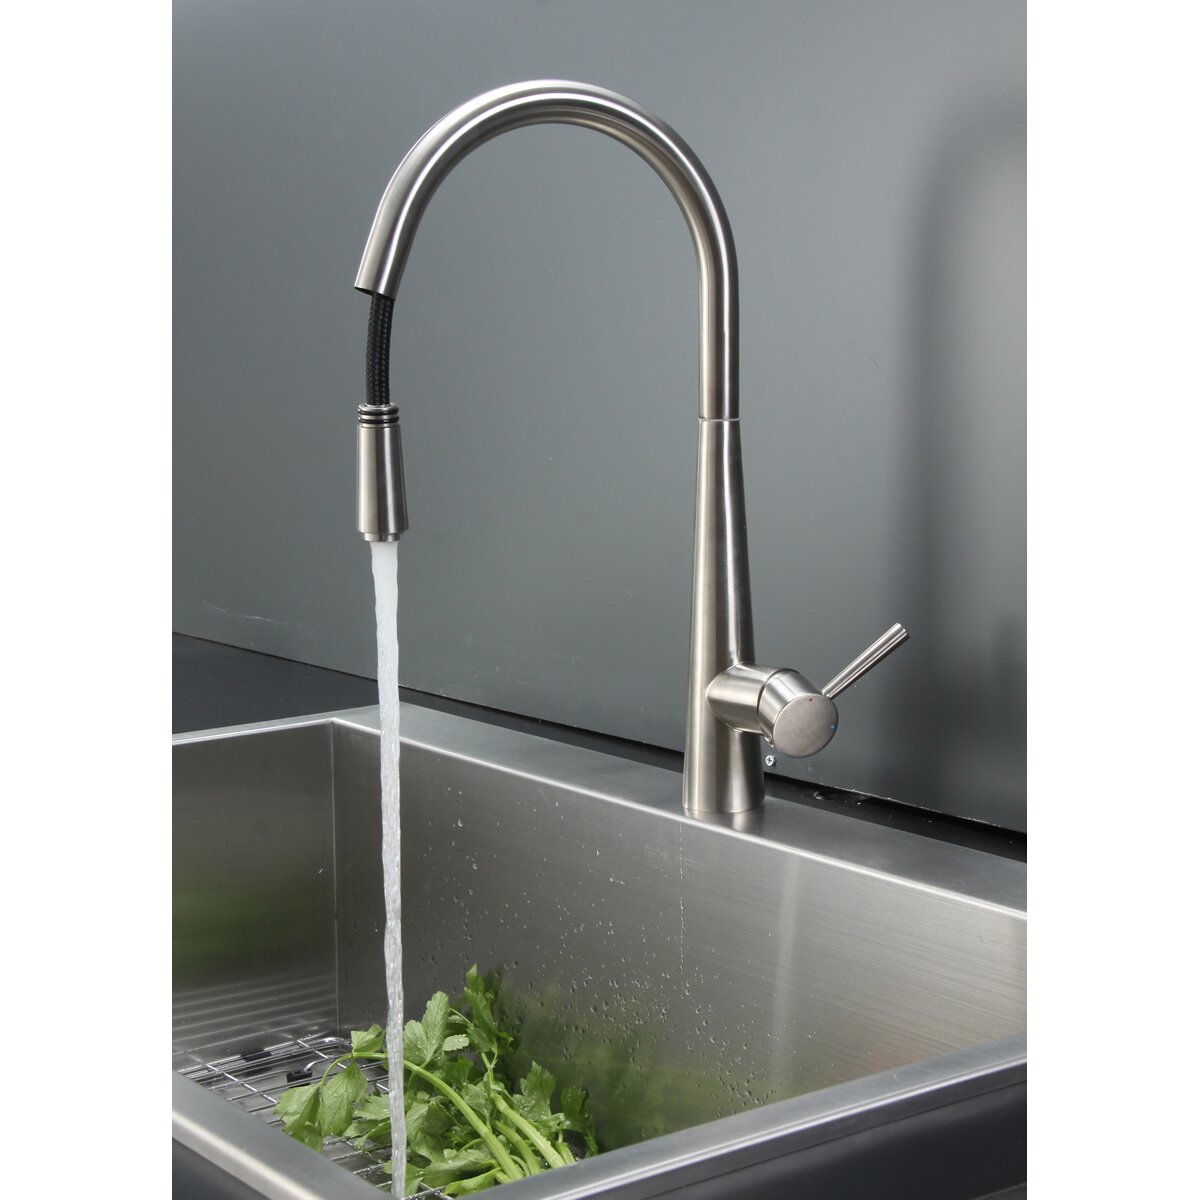 Ruvati 33" x 21" Kitchen Sink with Faucet & Reviews